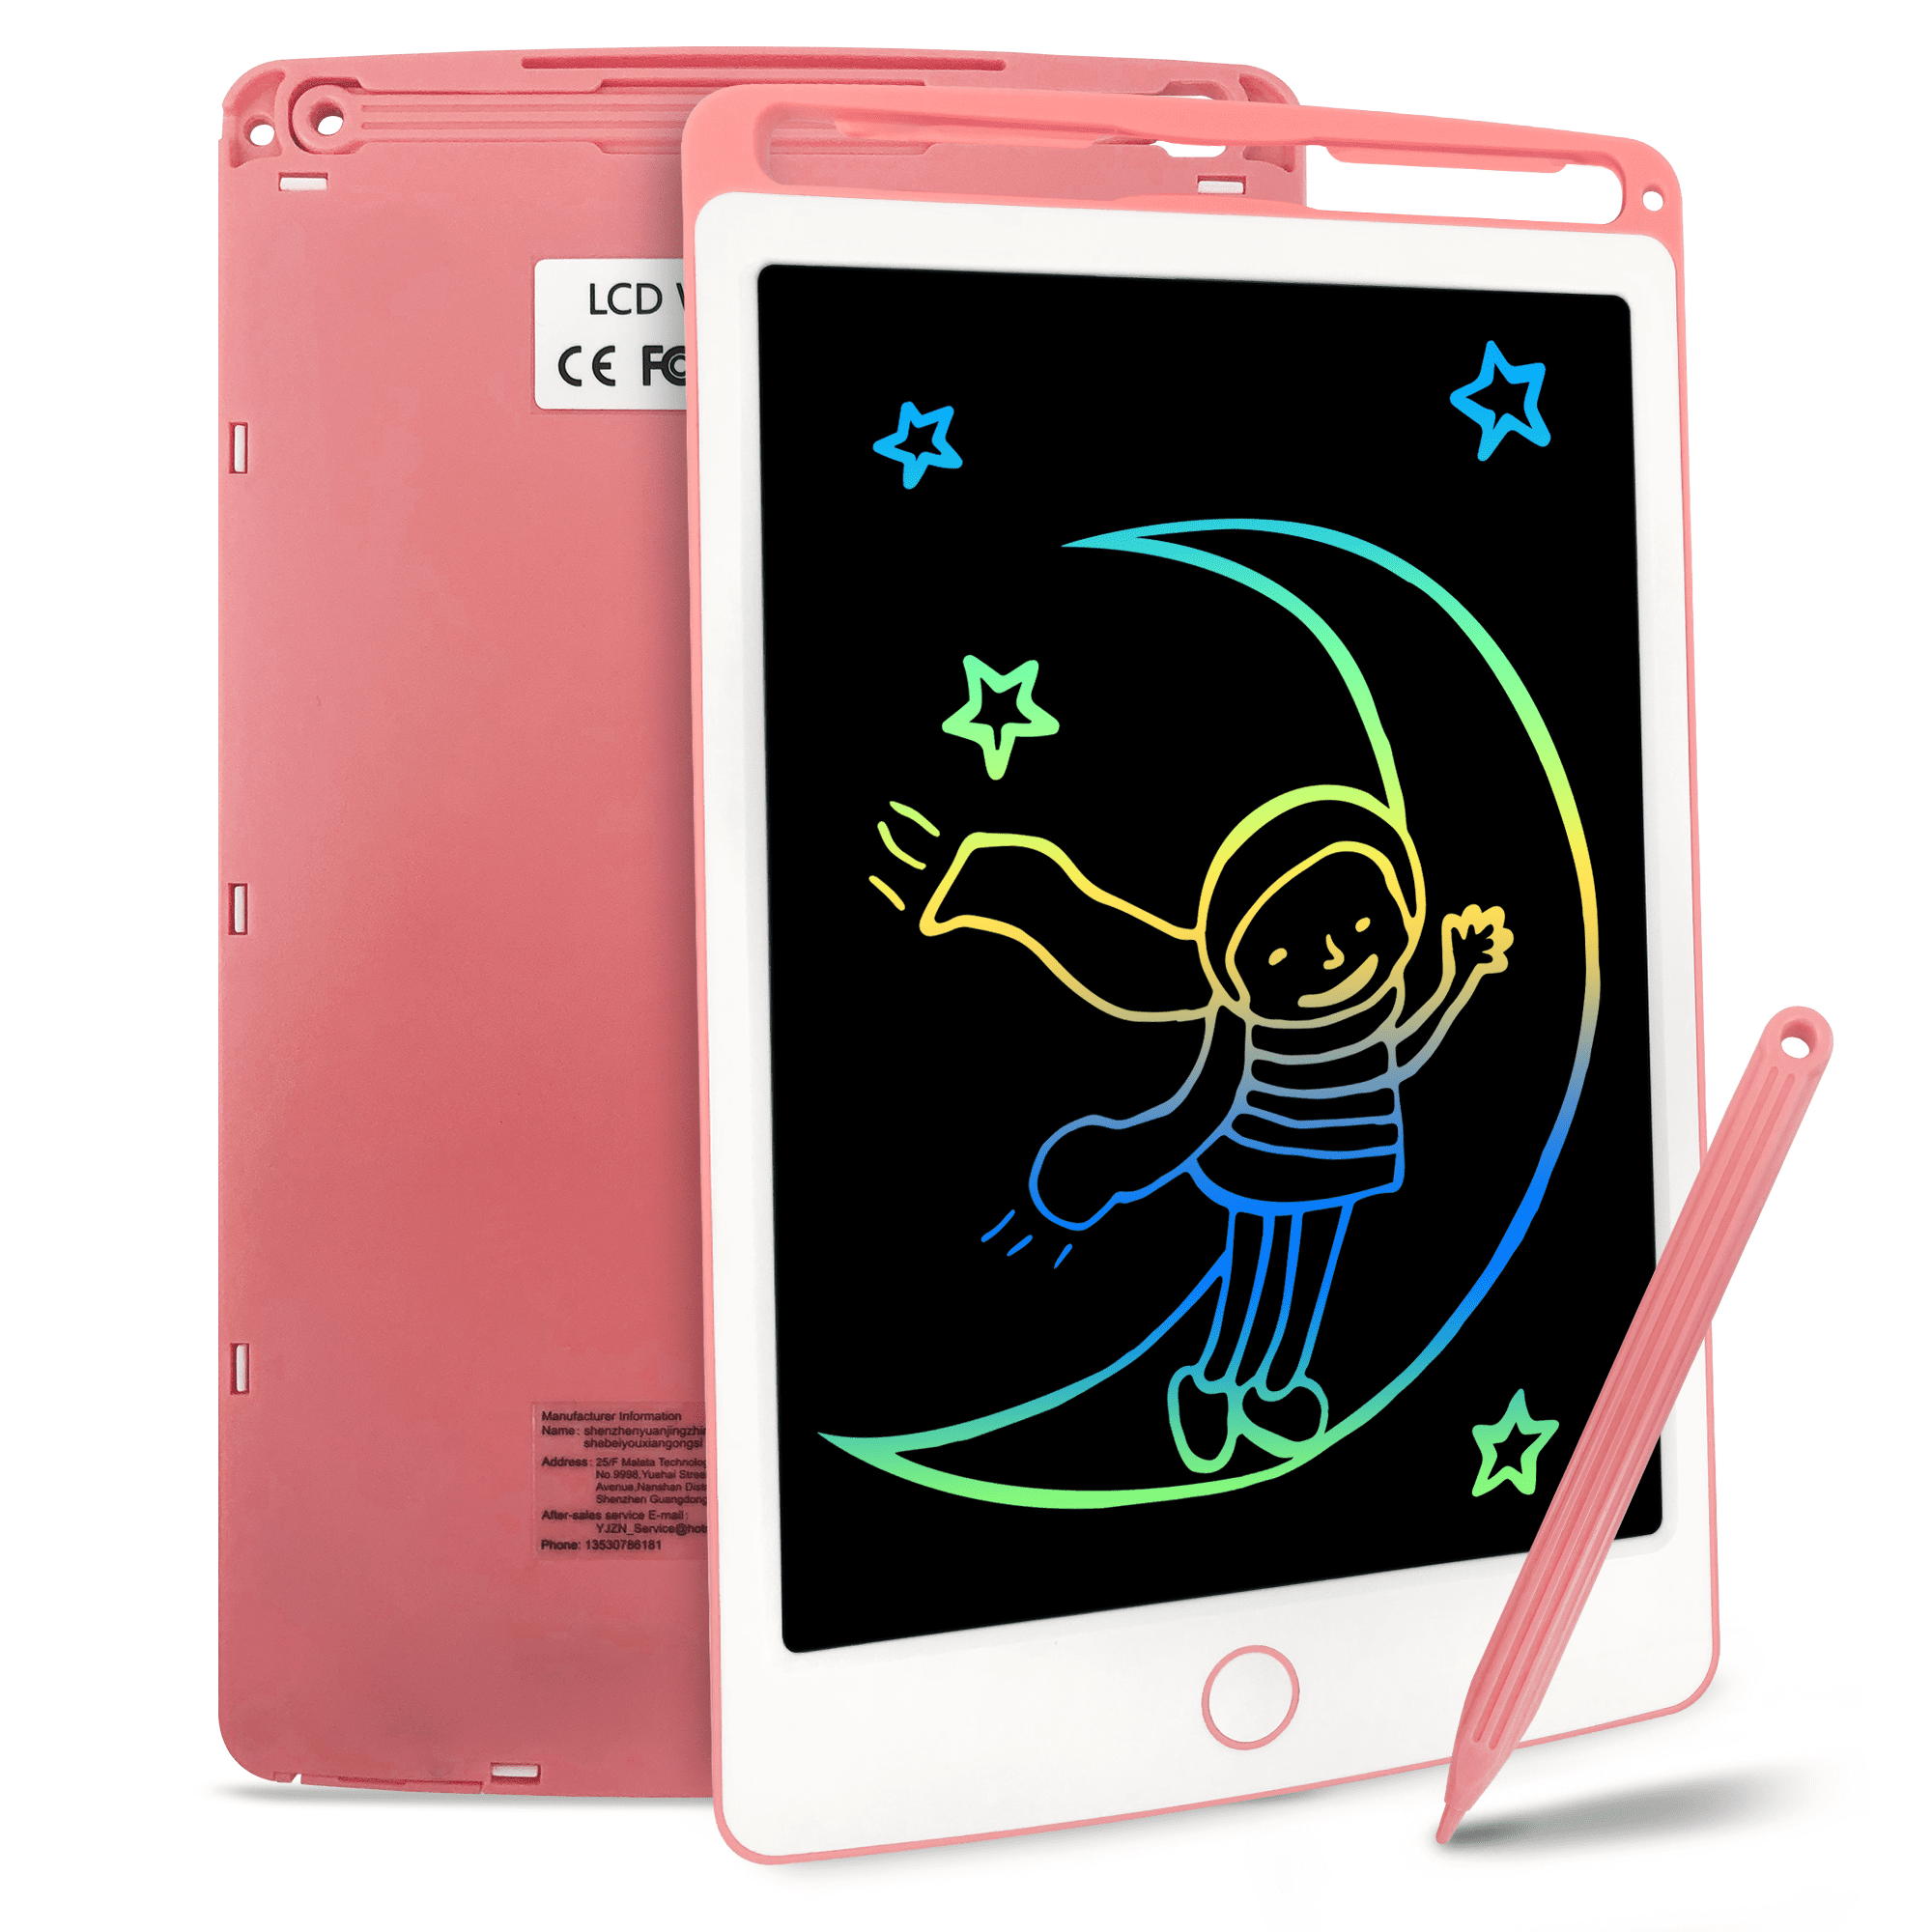 WOW Tastic W93473 LCD 10 INCH Kids Learning Drawing Tablet-Pink